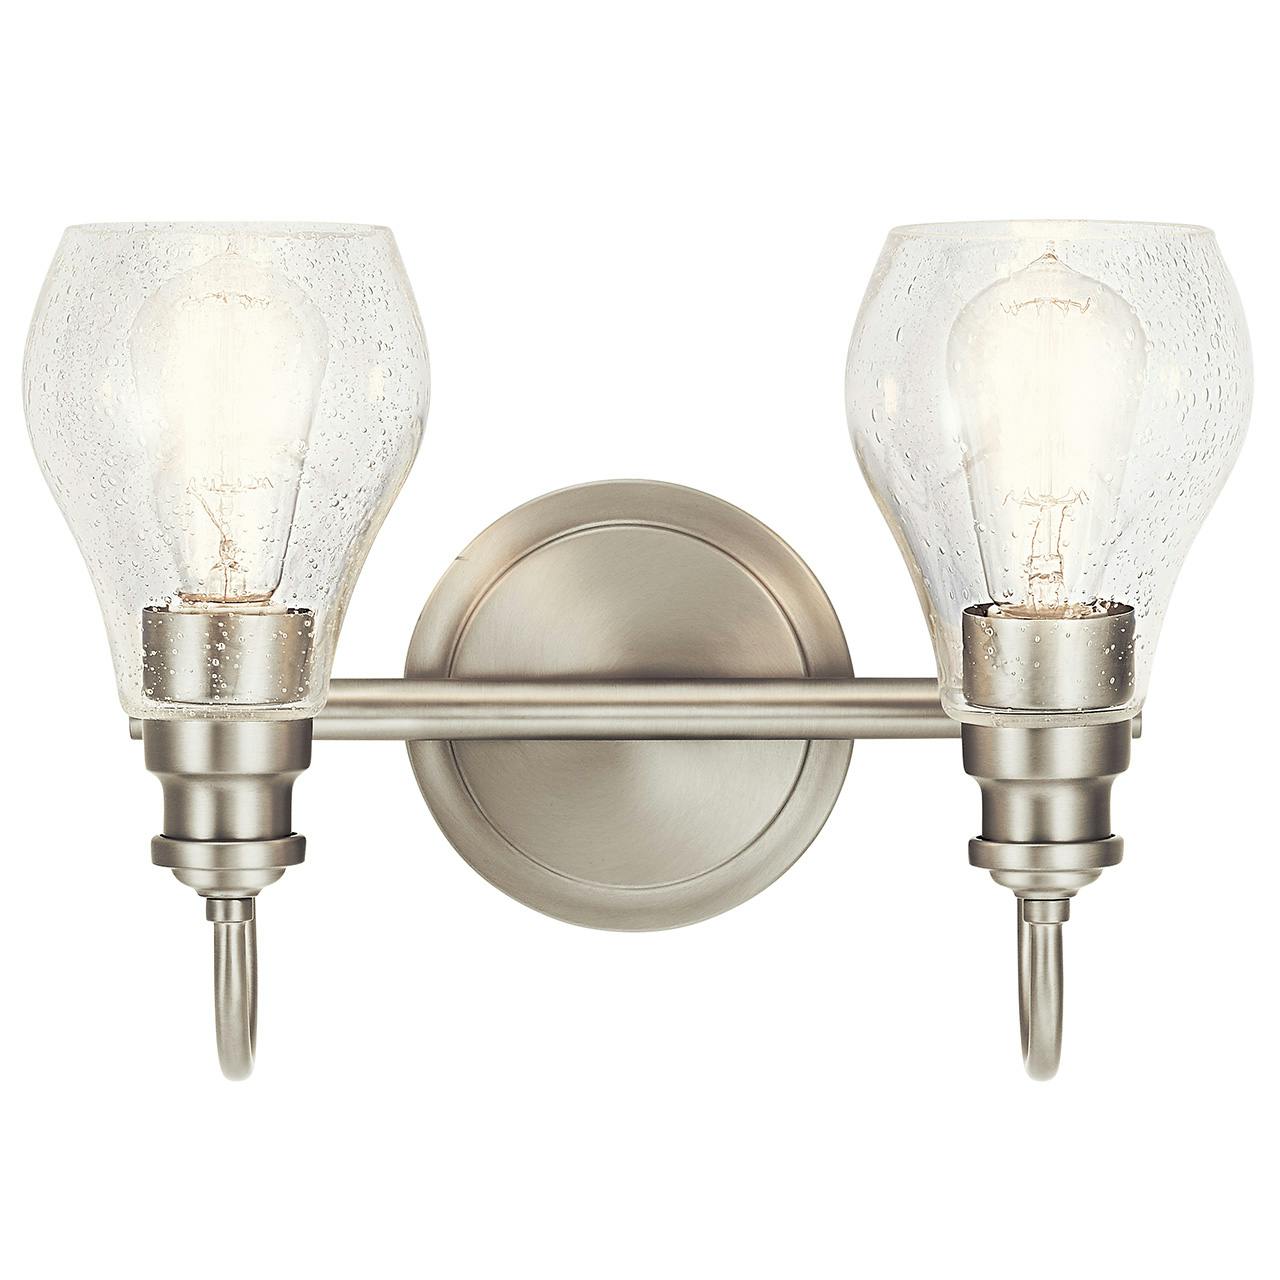 The Greenbrier™ 2 Light Vanity Light Nickel facing up on a white background